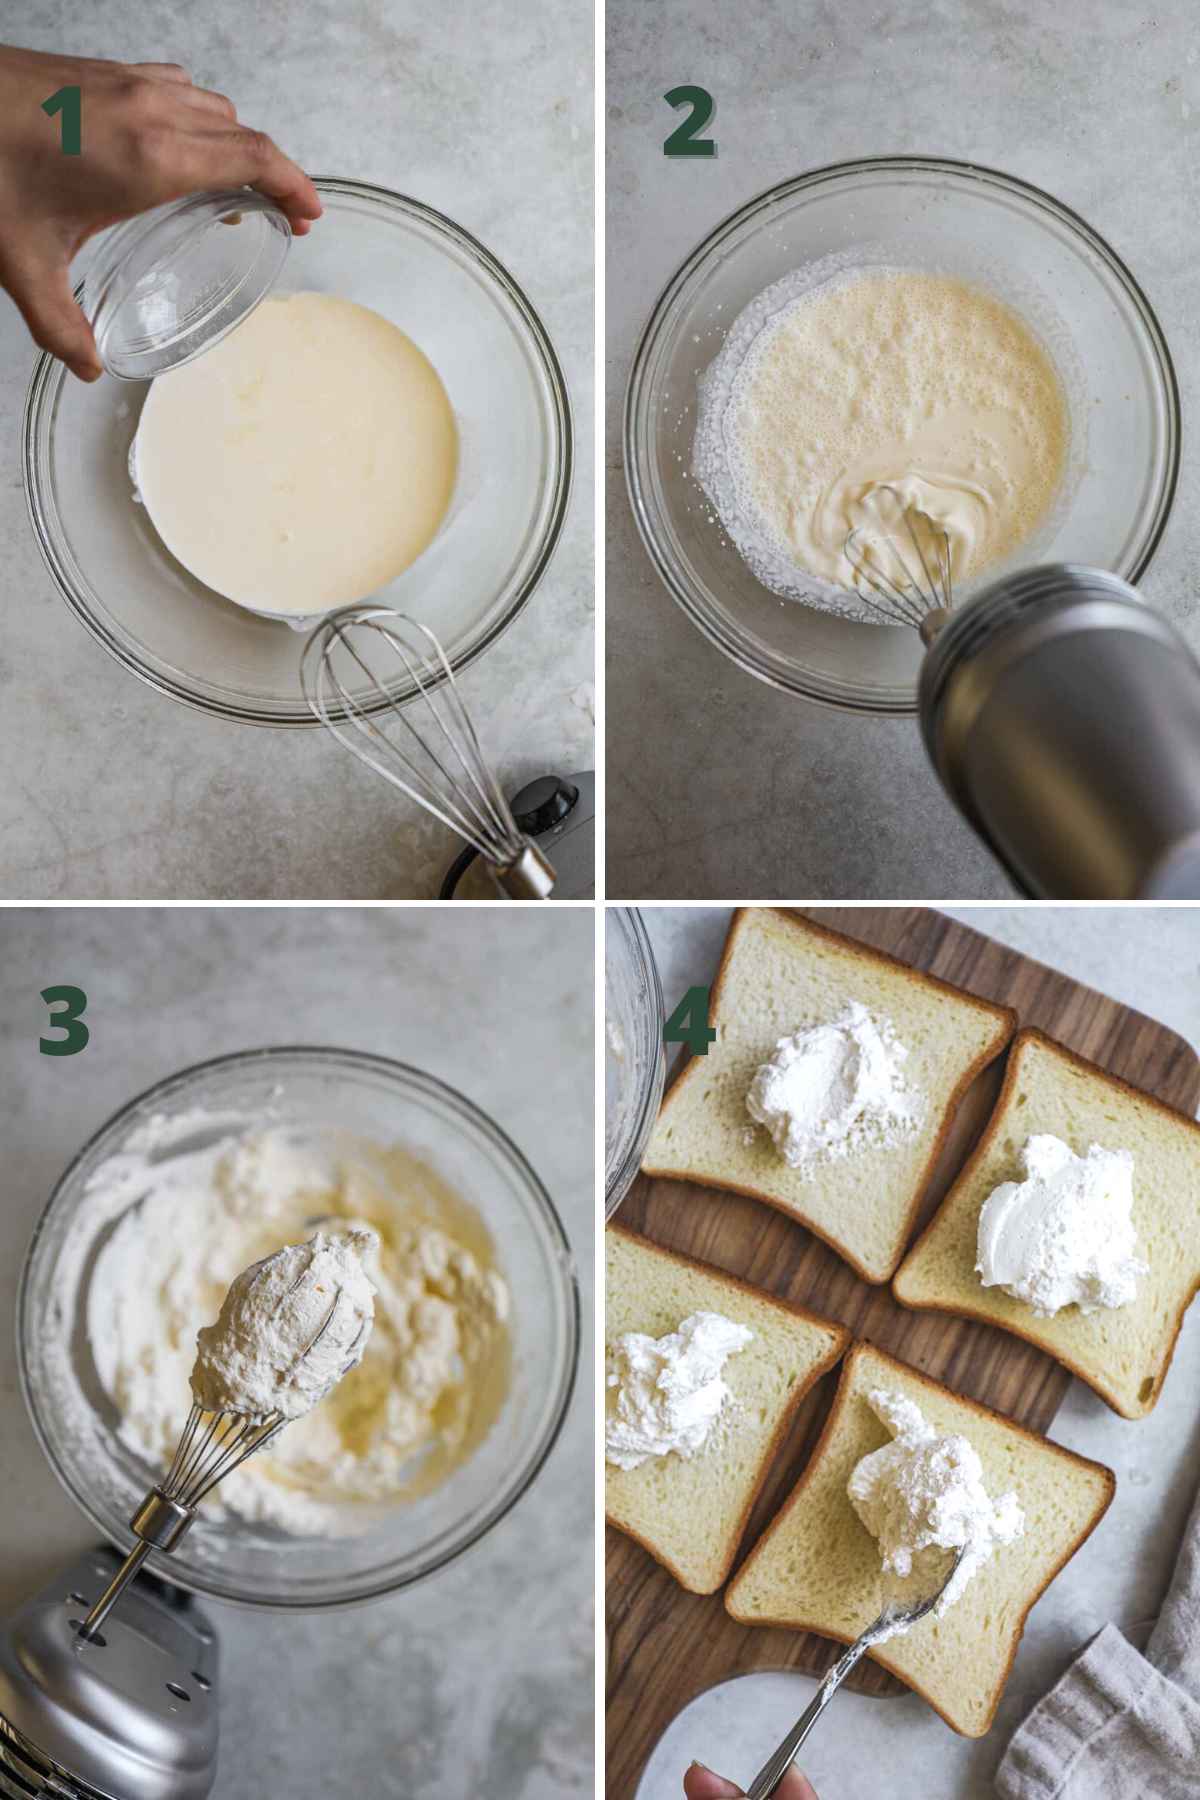 Steps to make japanese fruit sandwich, including adding honey to heavy whipping cream, whipping until it turns into whipped cream, and spreading on shokupan.